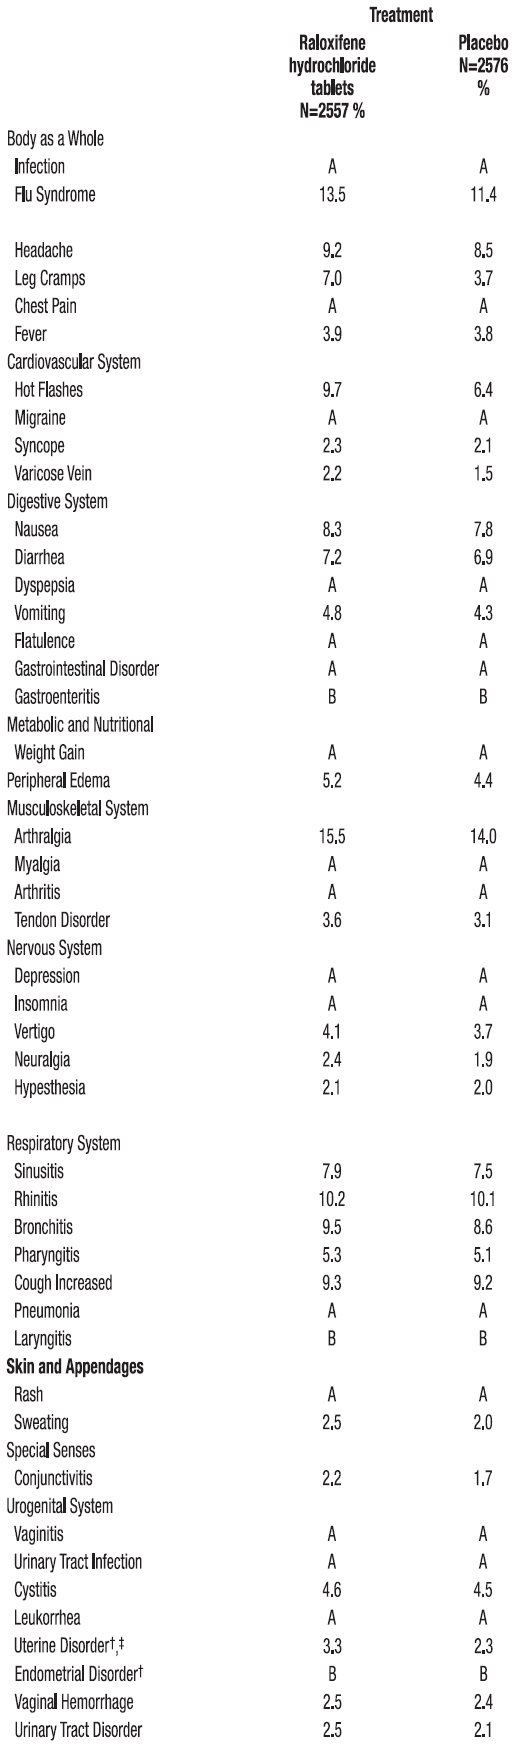 Table 1: Adverse Reactions Occurring in Placebo–Controlled Osteoporosis Clinical Trials at a Frequency ≥2.0 and in more Raloxifene Hydrochloride Tablets-Treated (60 mg Once Daily) Women than Place